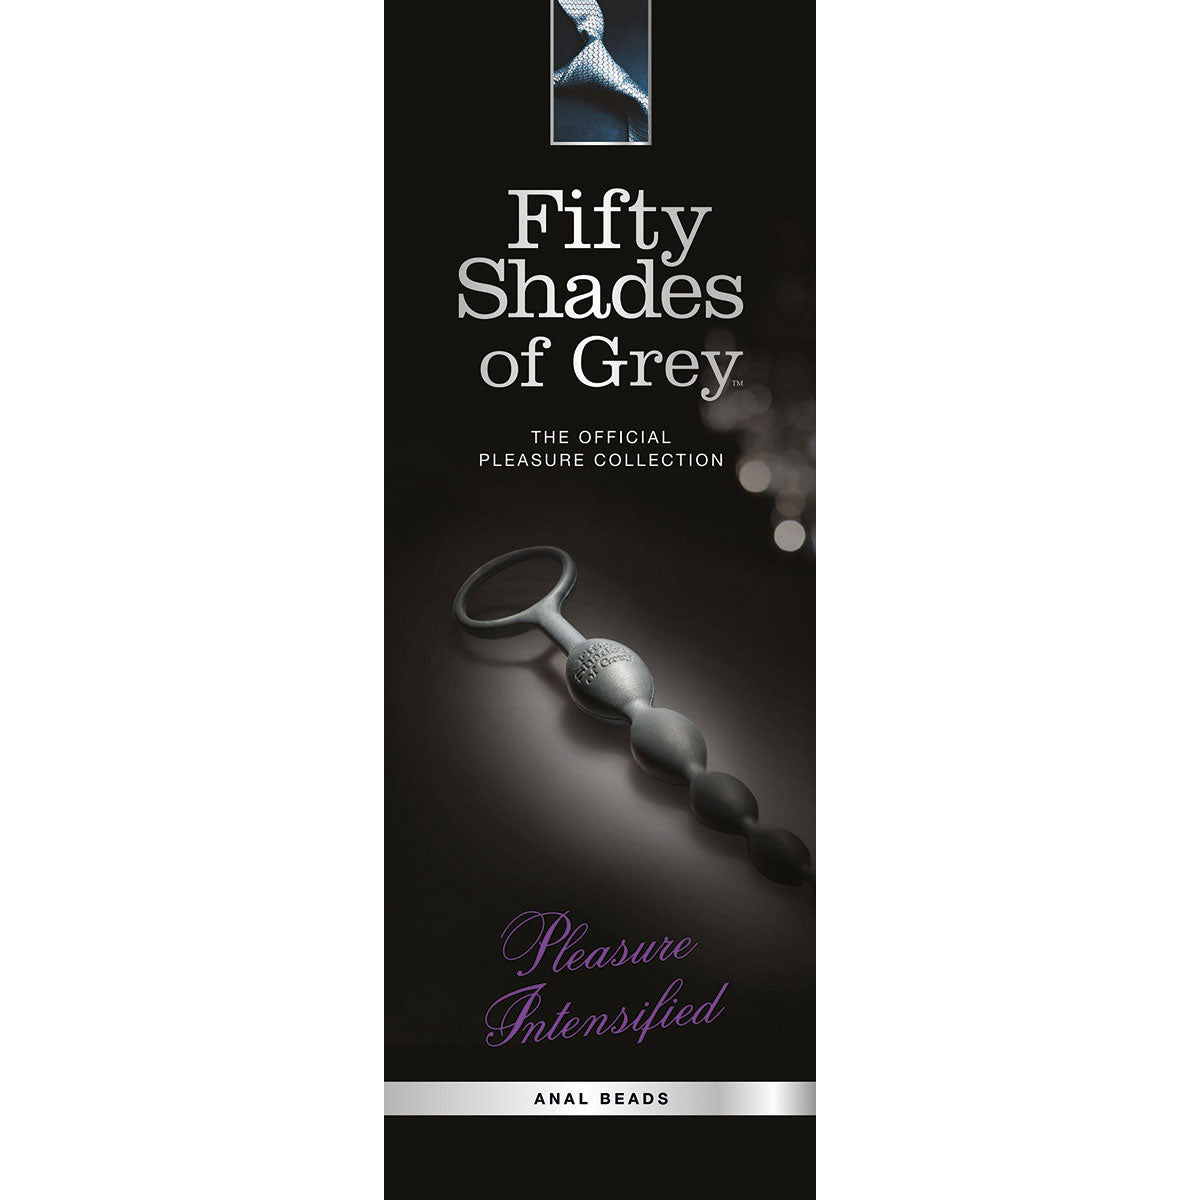 Fifty Shades - Pleasure Intensified Anal Beads Fifty Shades of Grey